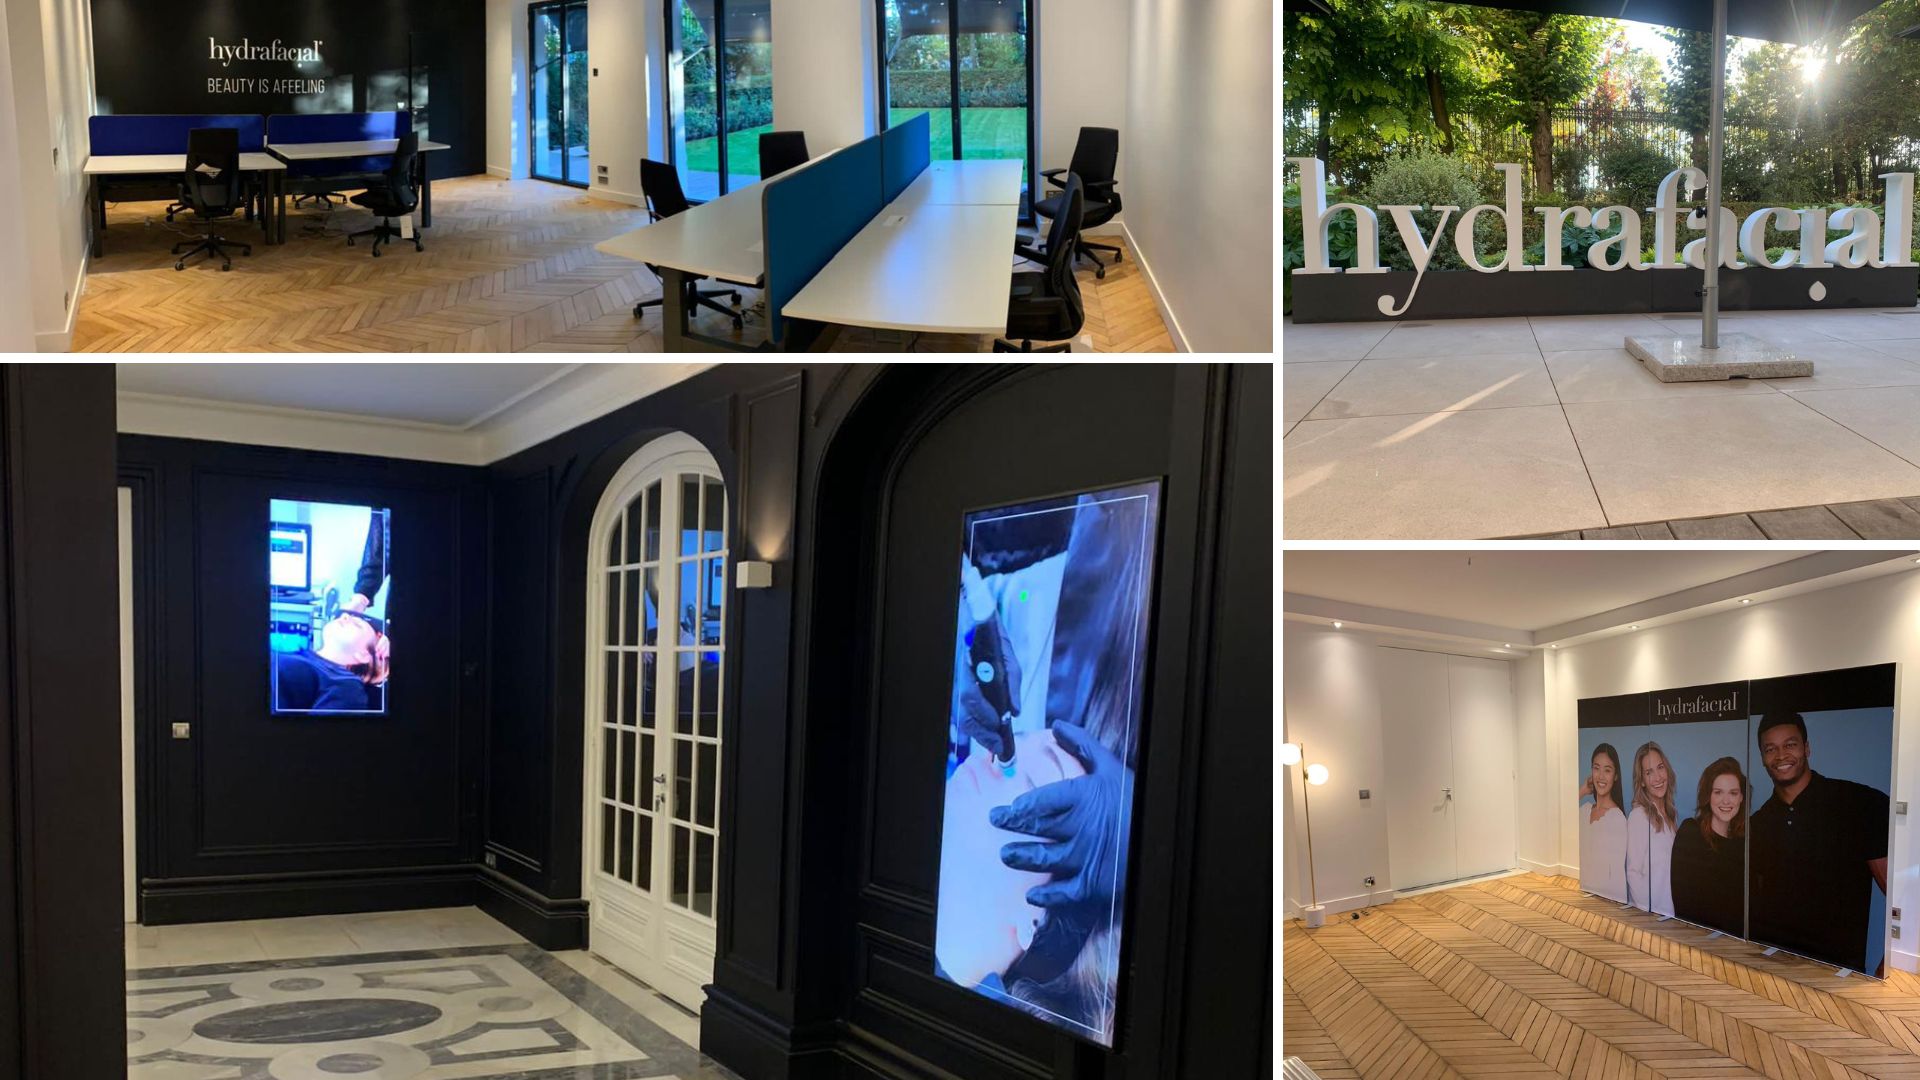 Delivering a vibrant office space for a premium, global skincare brand, Hydrafacial